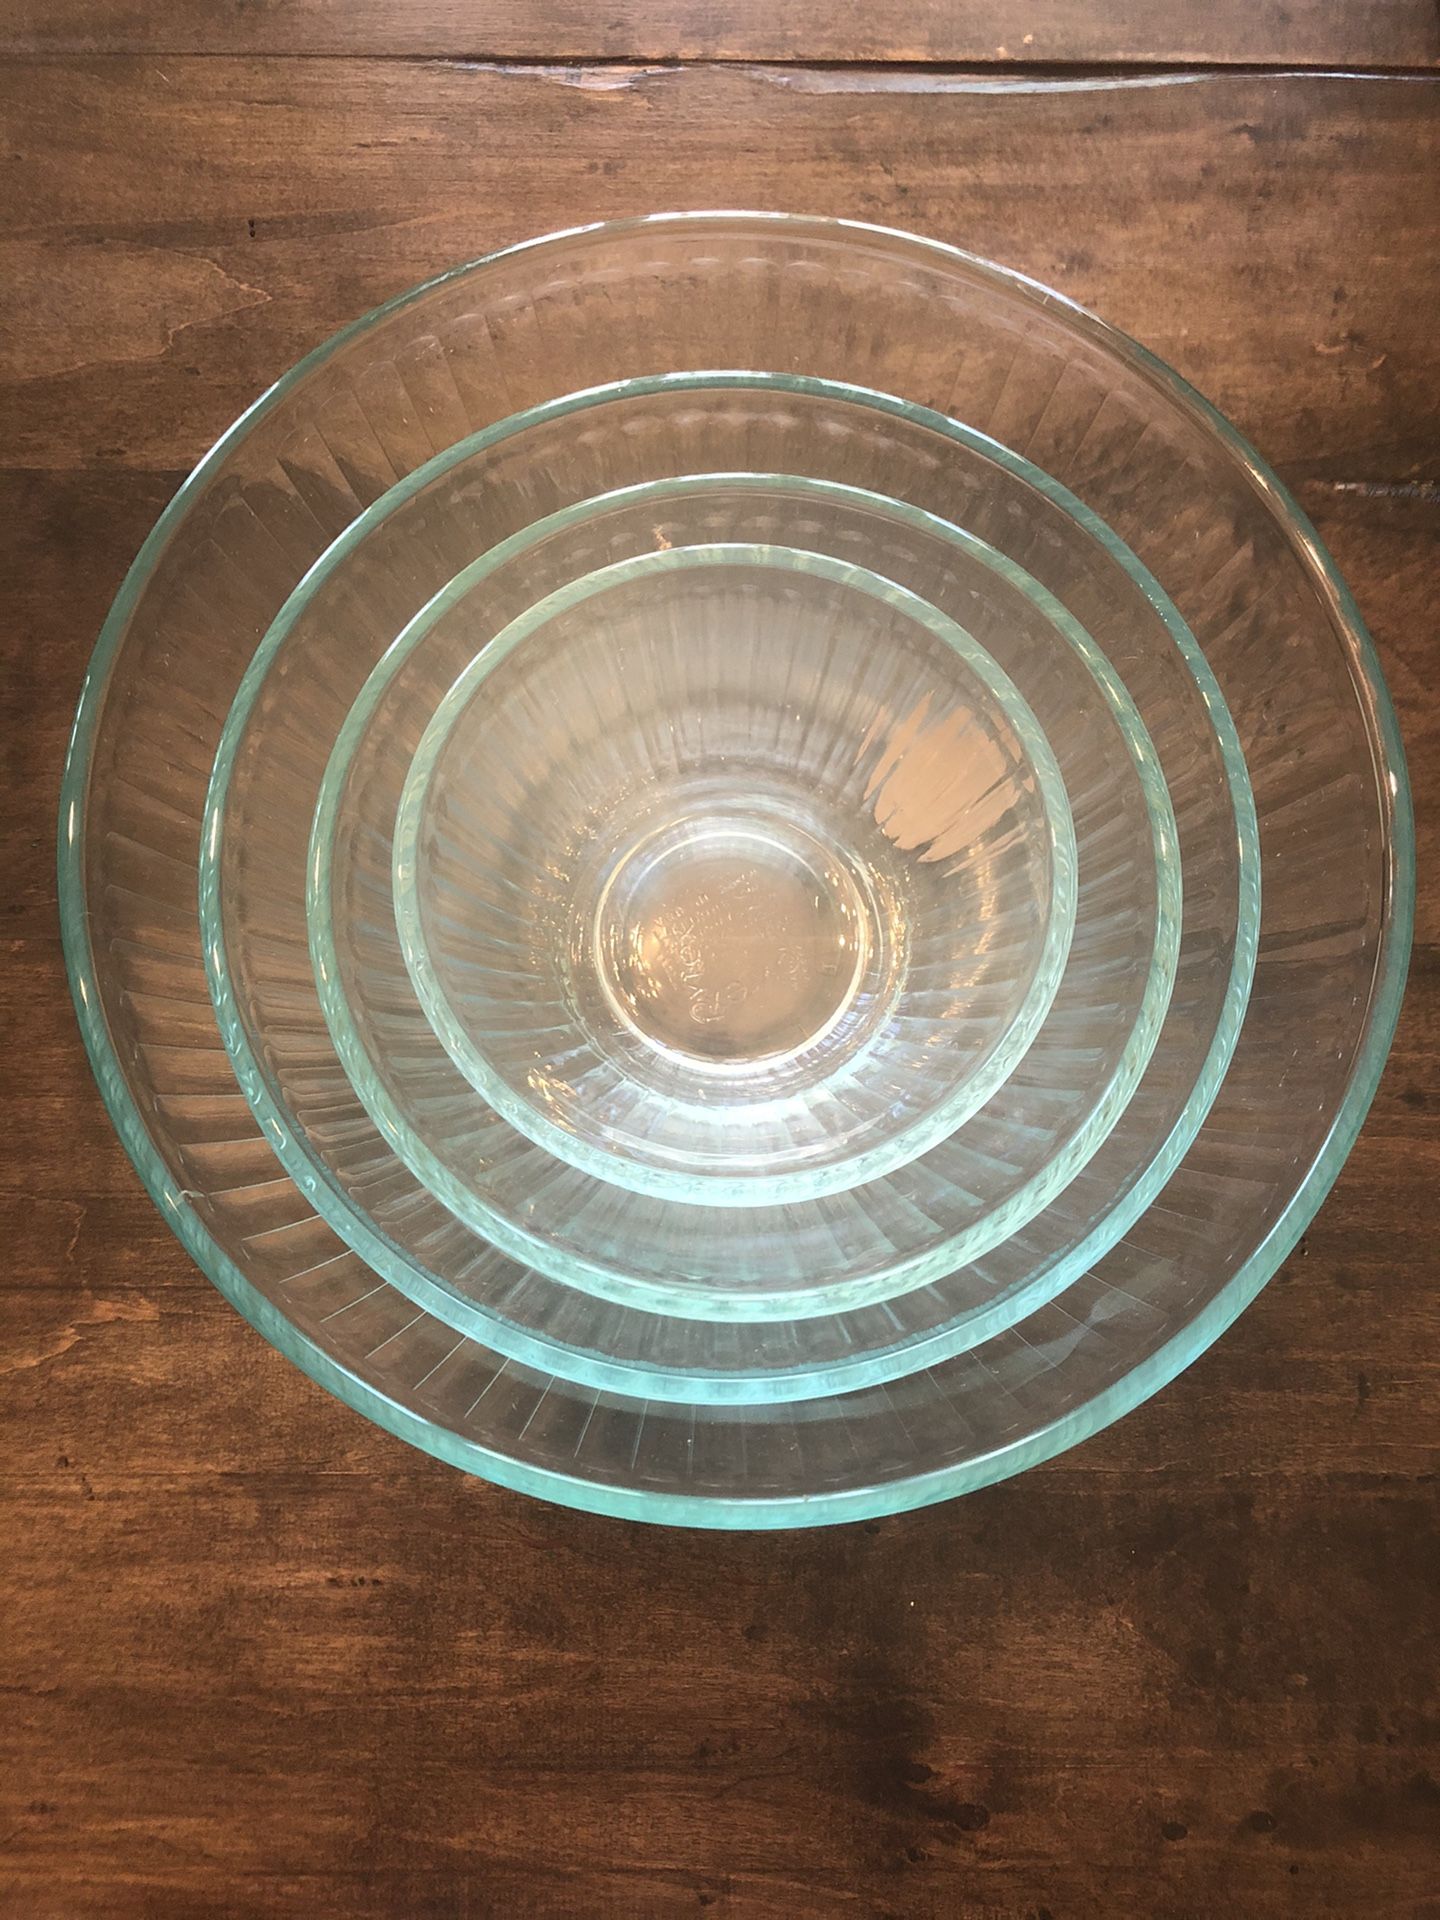 4 piece ribbed Pyrex complete set